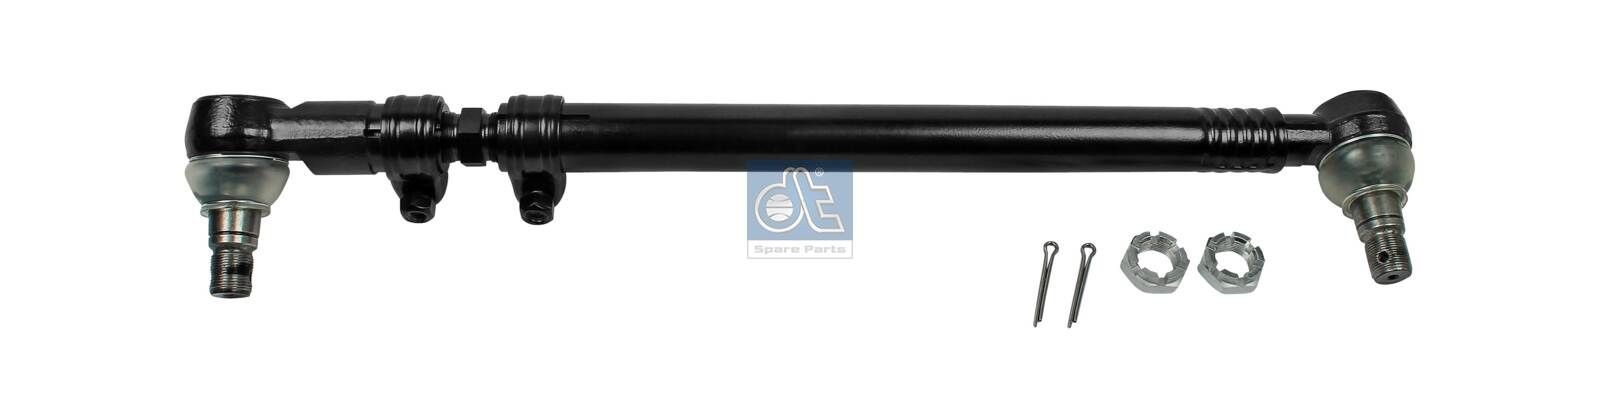 DT Spare Parts 4.65666 Rod Assembly 8226328000